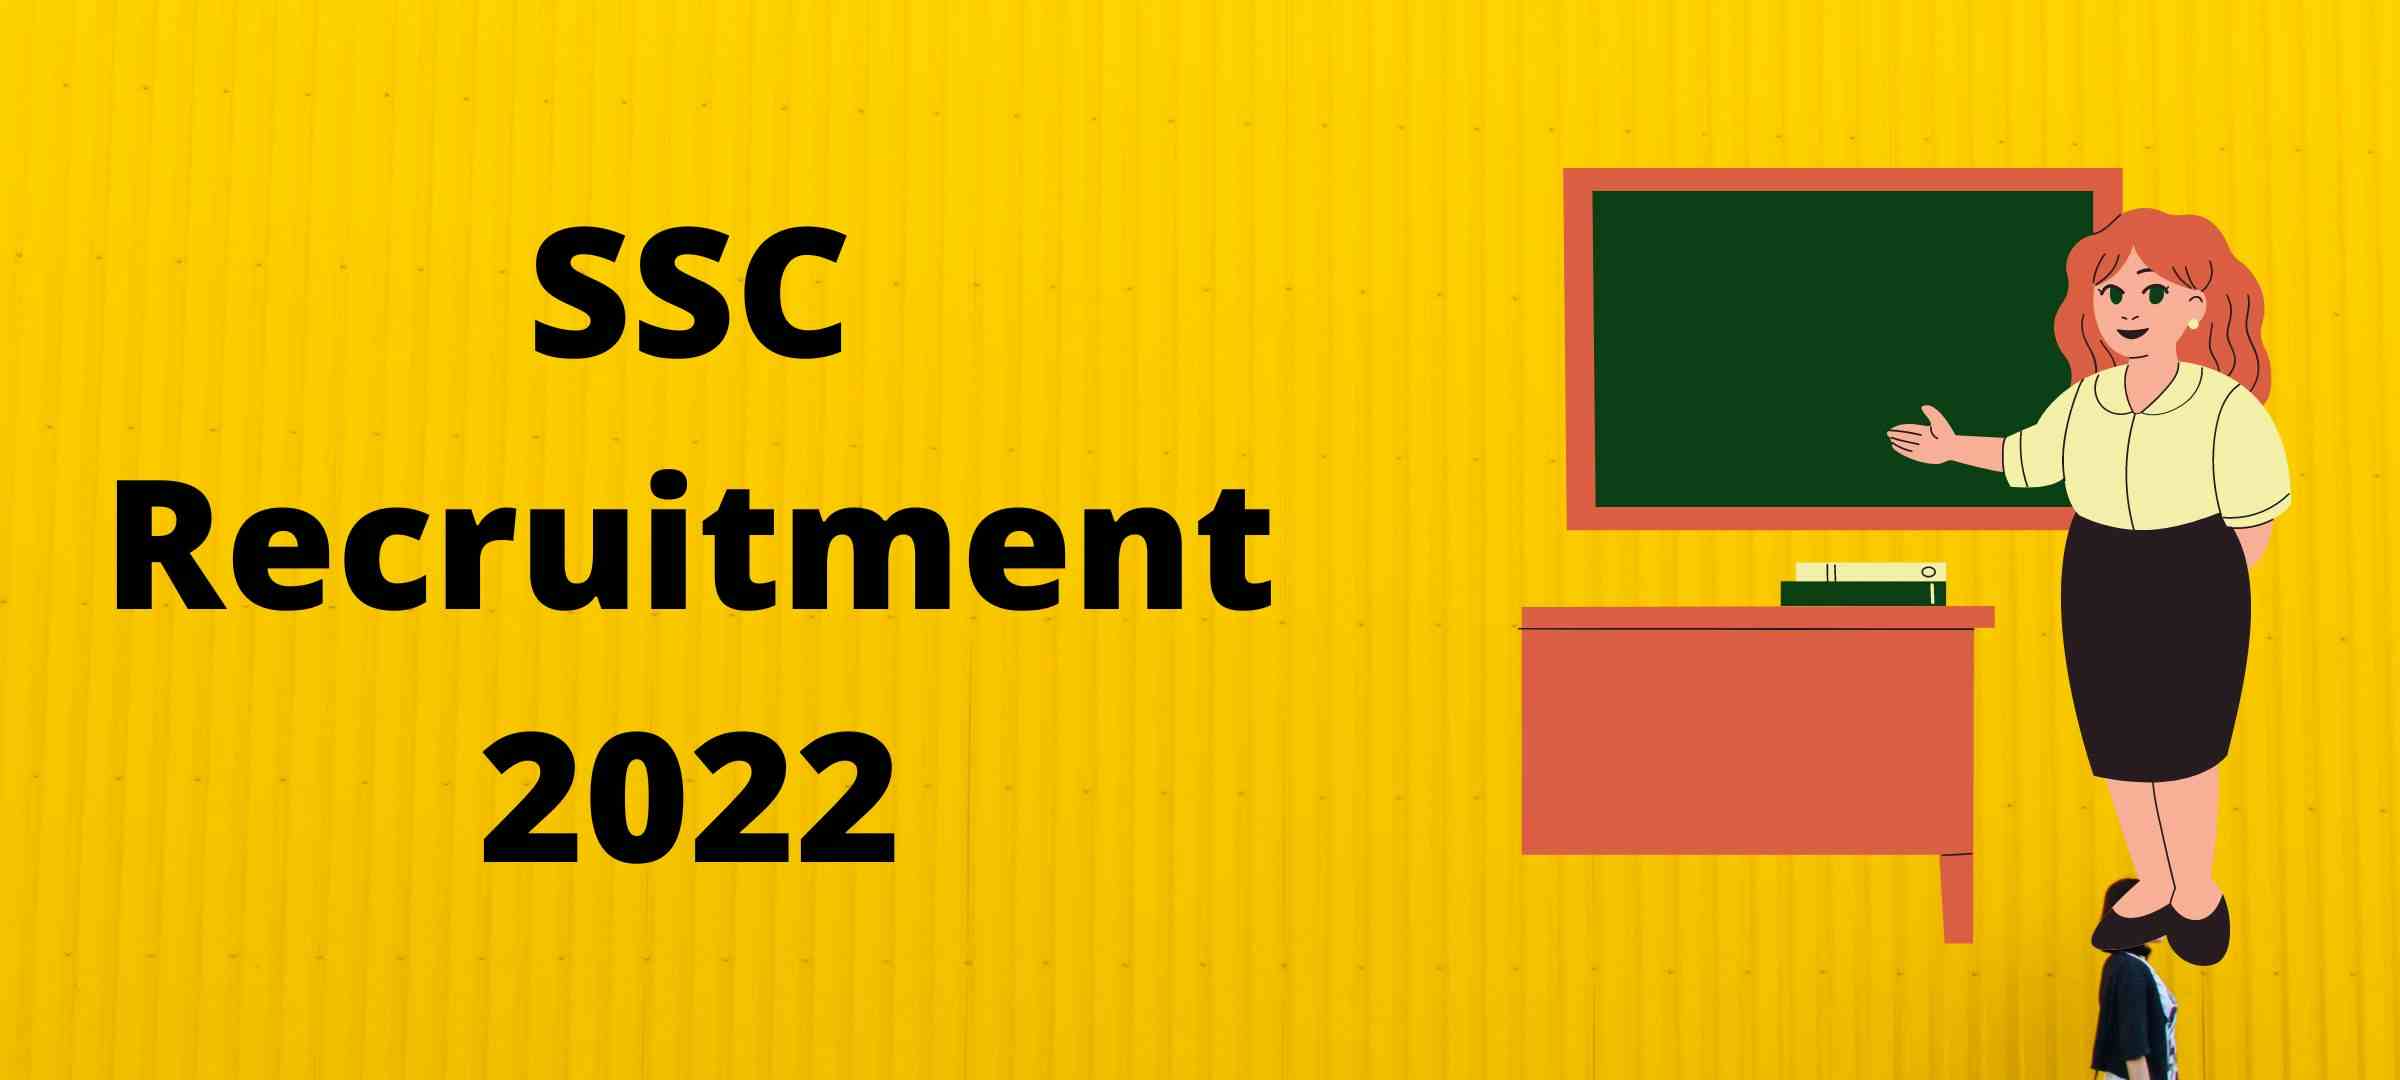 SSC Recruitment 2022 apply online - get Notification agricluture head constable age limit and qulification